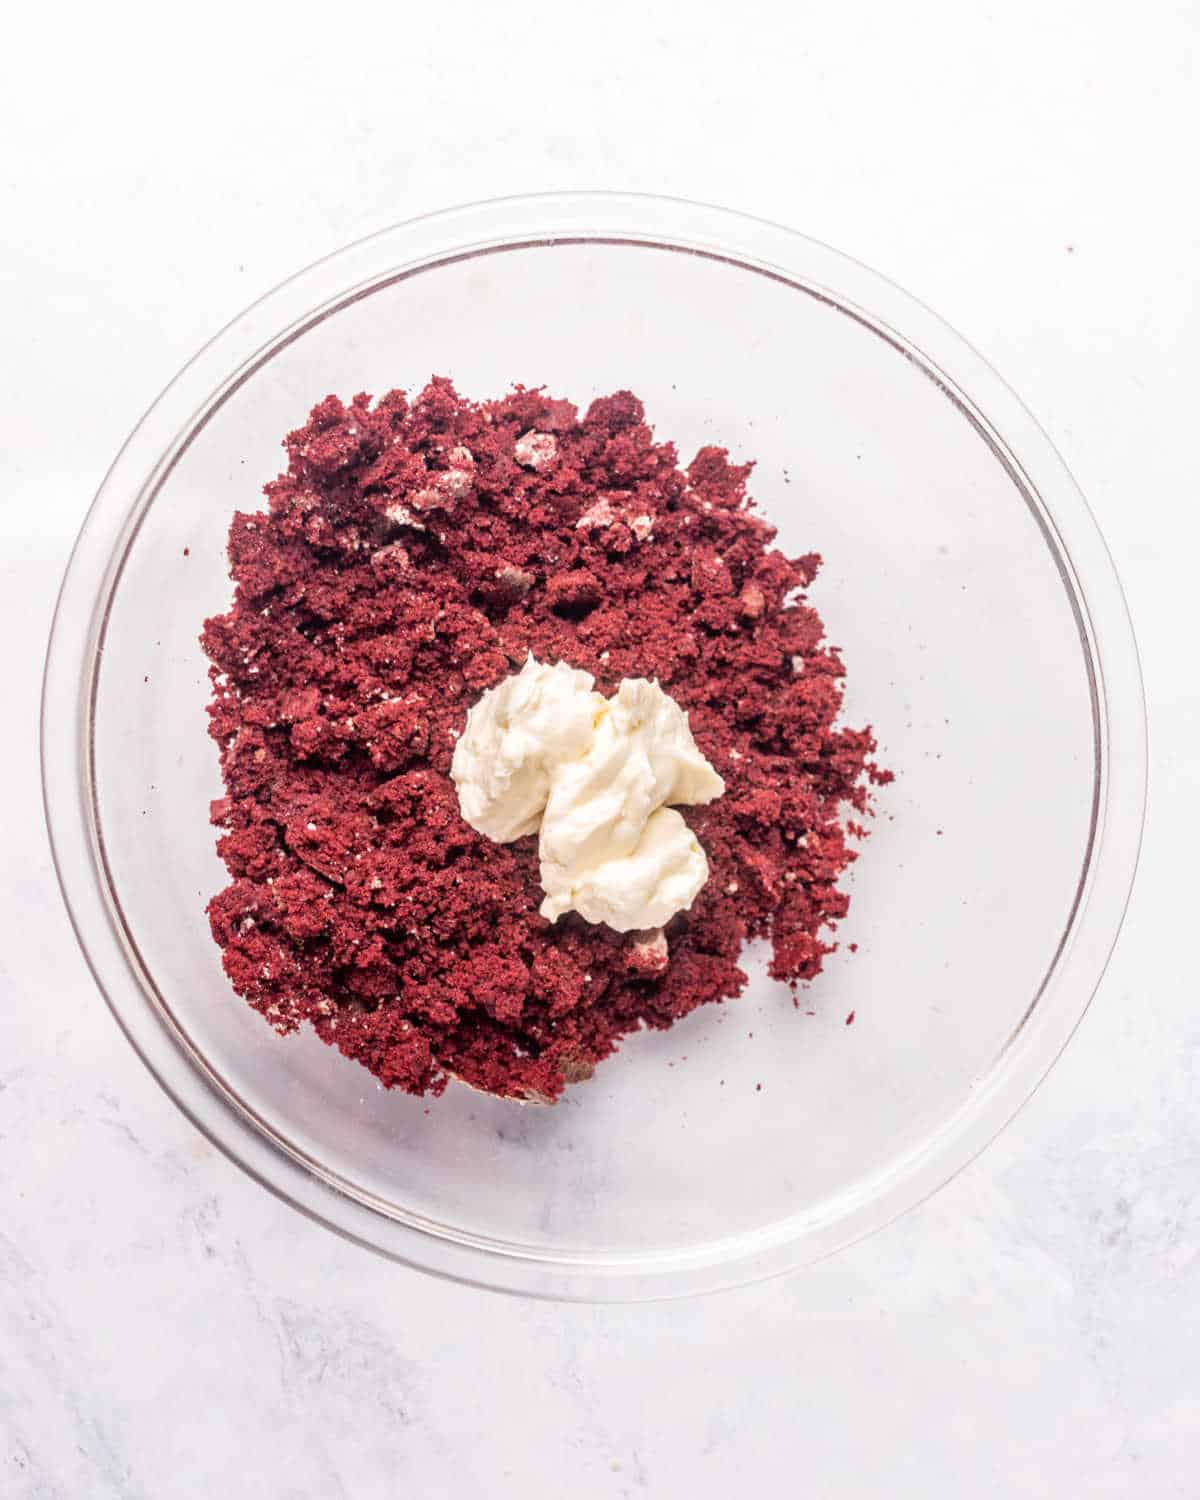 Glass bowl with red velvet cake crumbs and cream cheese dollop on a greyish surface.